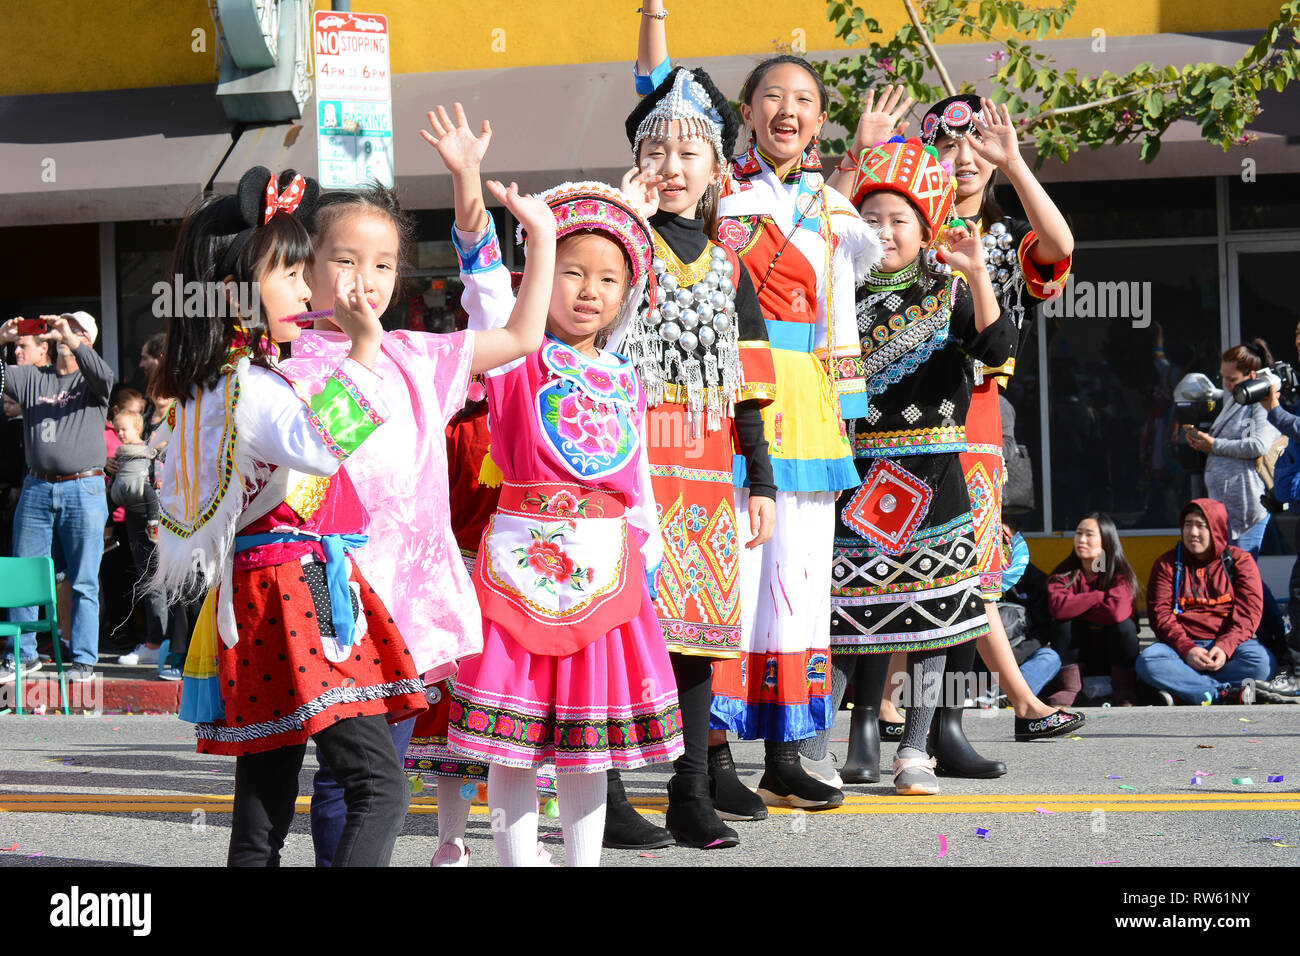 LOS ANGELES - FEBRUARY 9, 2019: Thai Children dressed in traditional costume at Los Angeles Chinese New Year Parade. Stock Photo